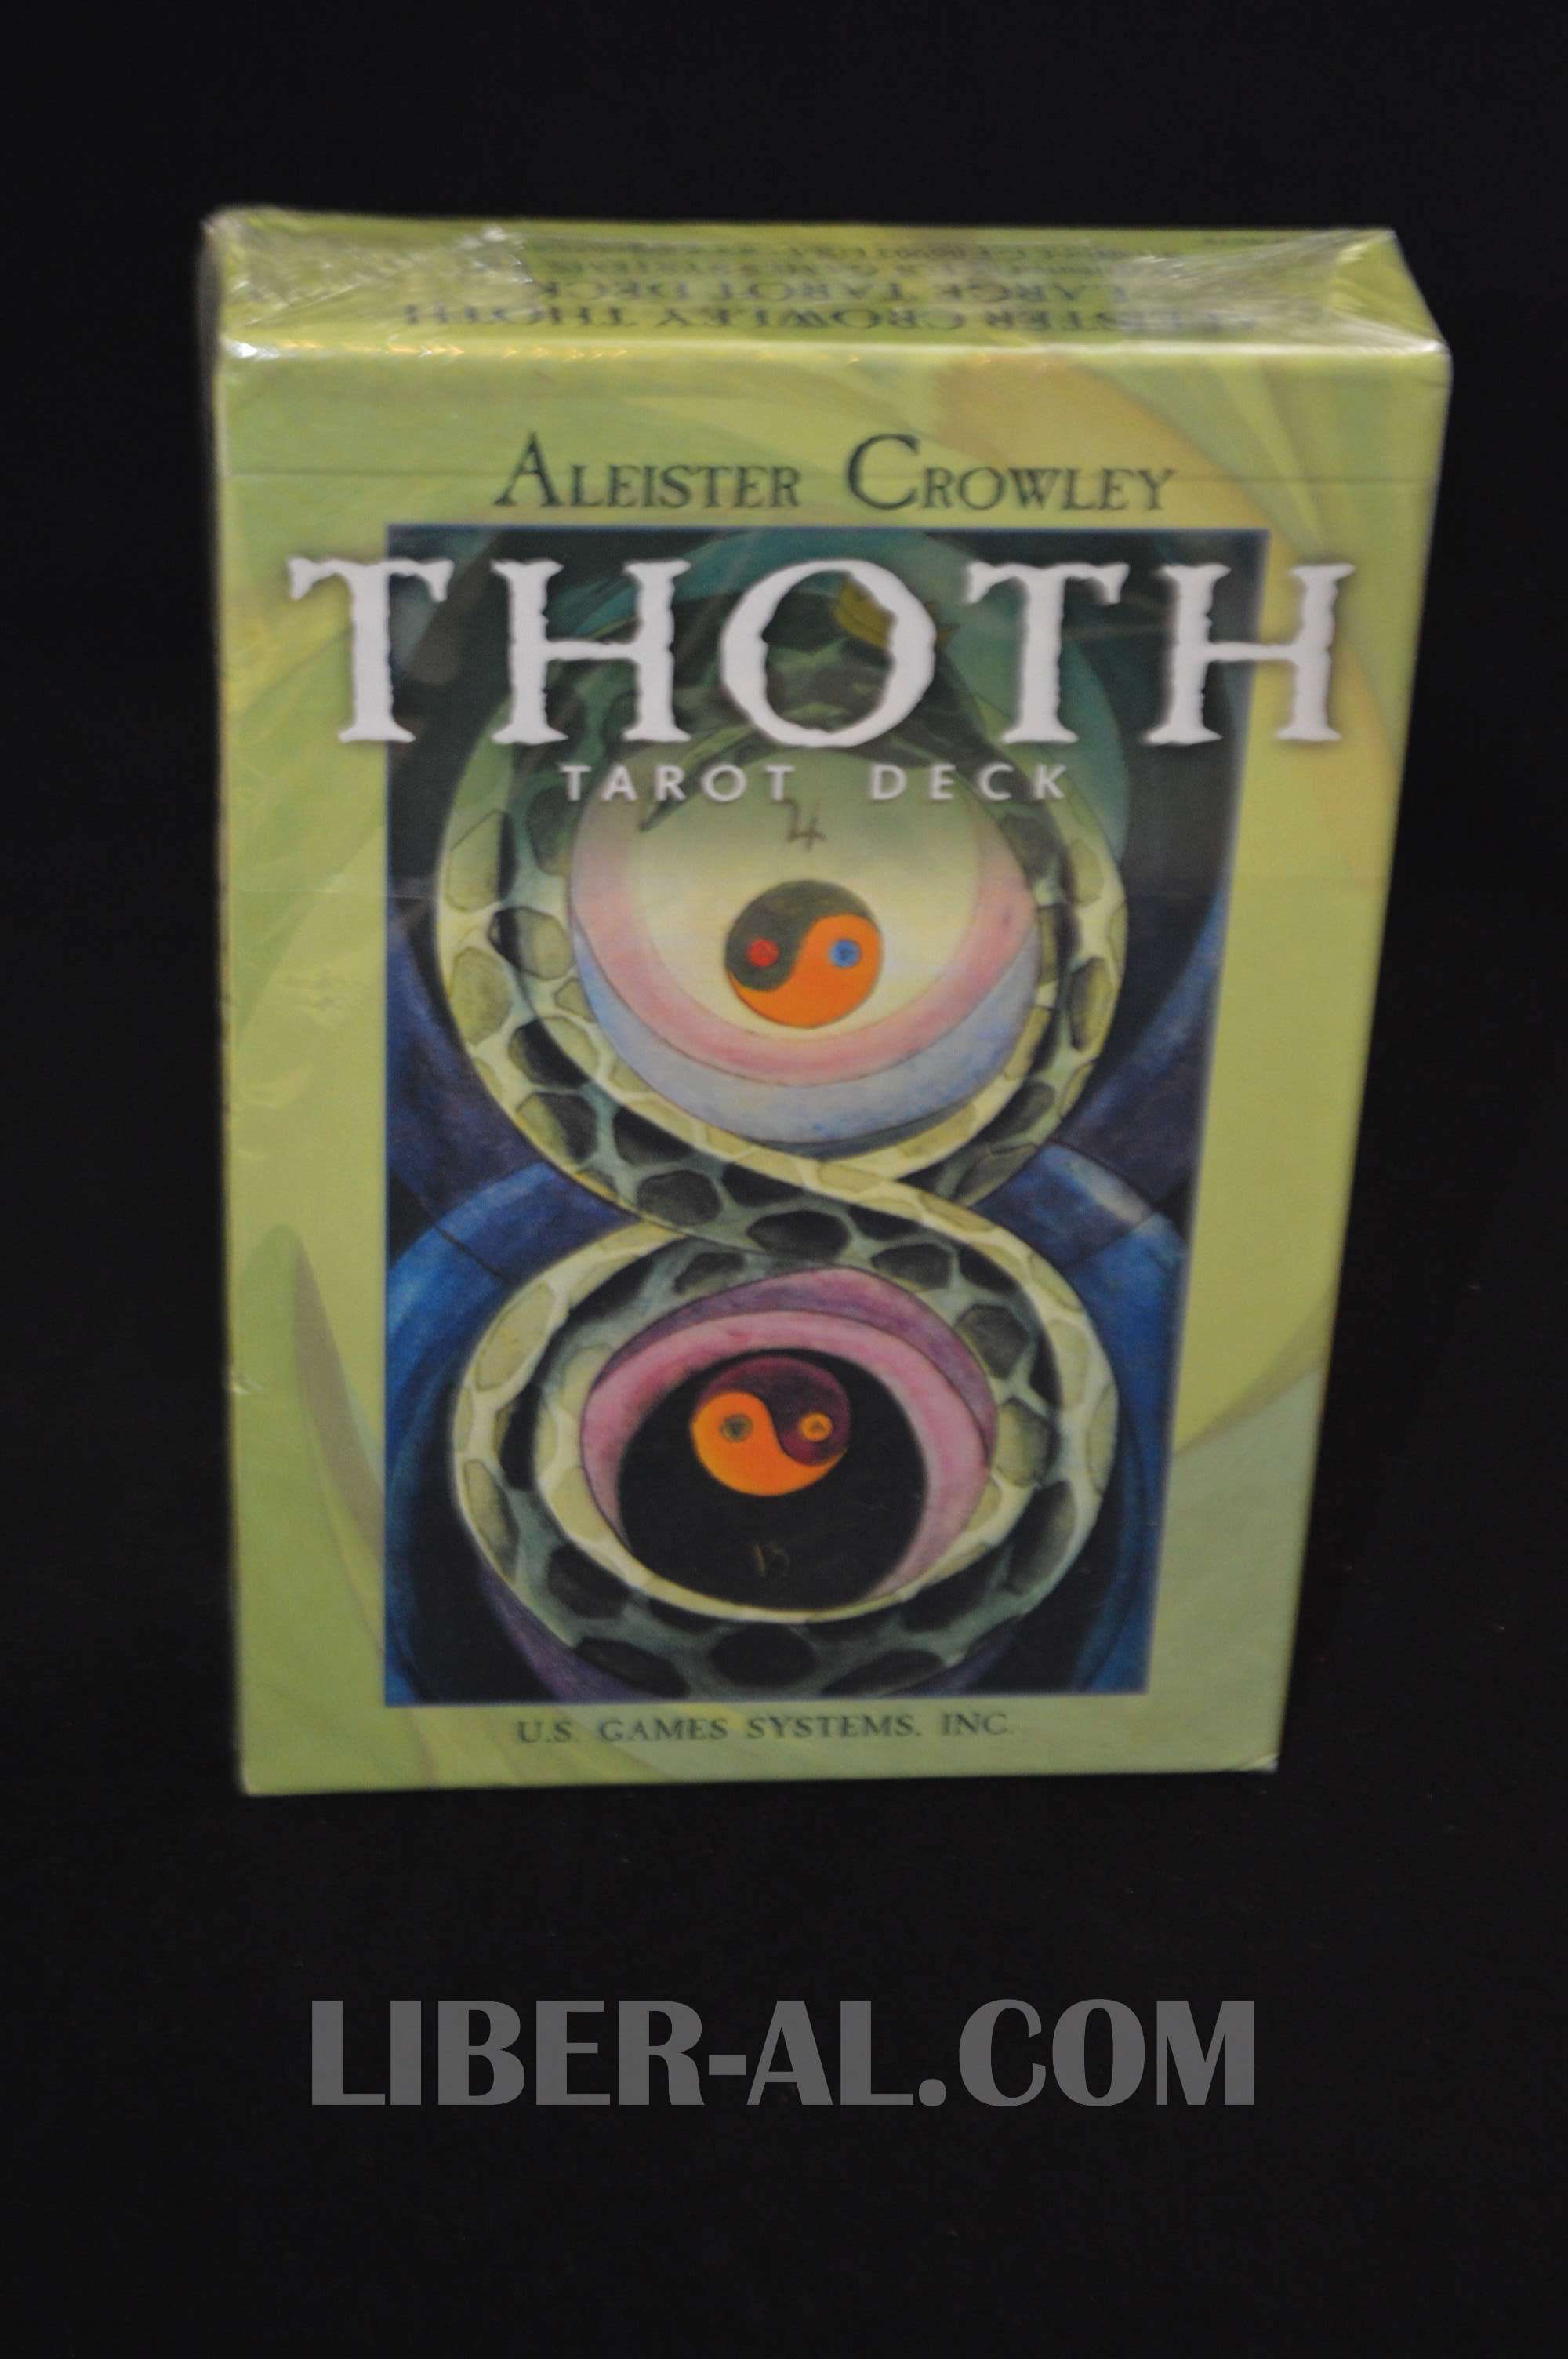 ALEISTER CROWLEY LARGE THOTH TAROT DECK (GREEN BOX)